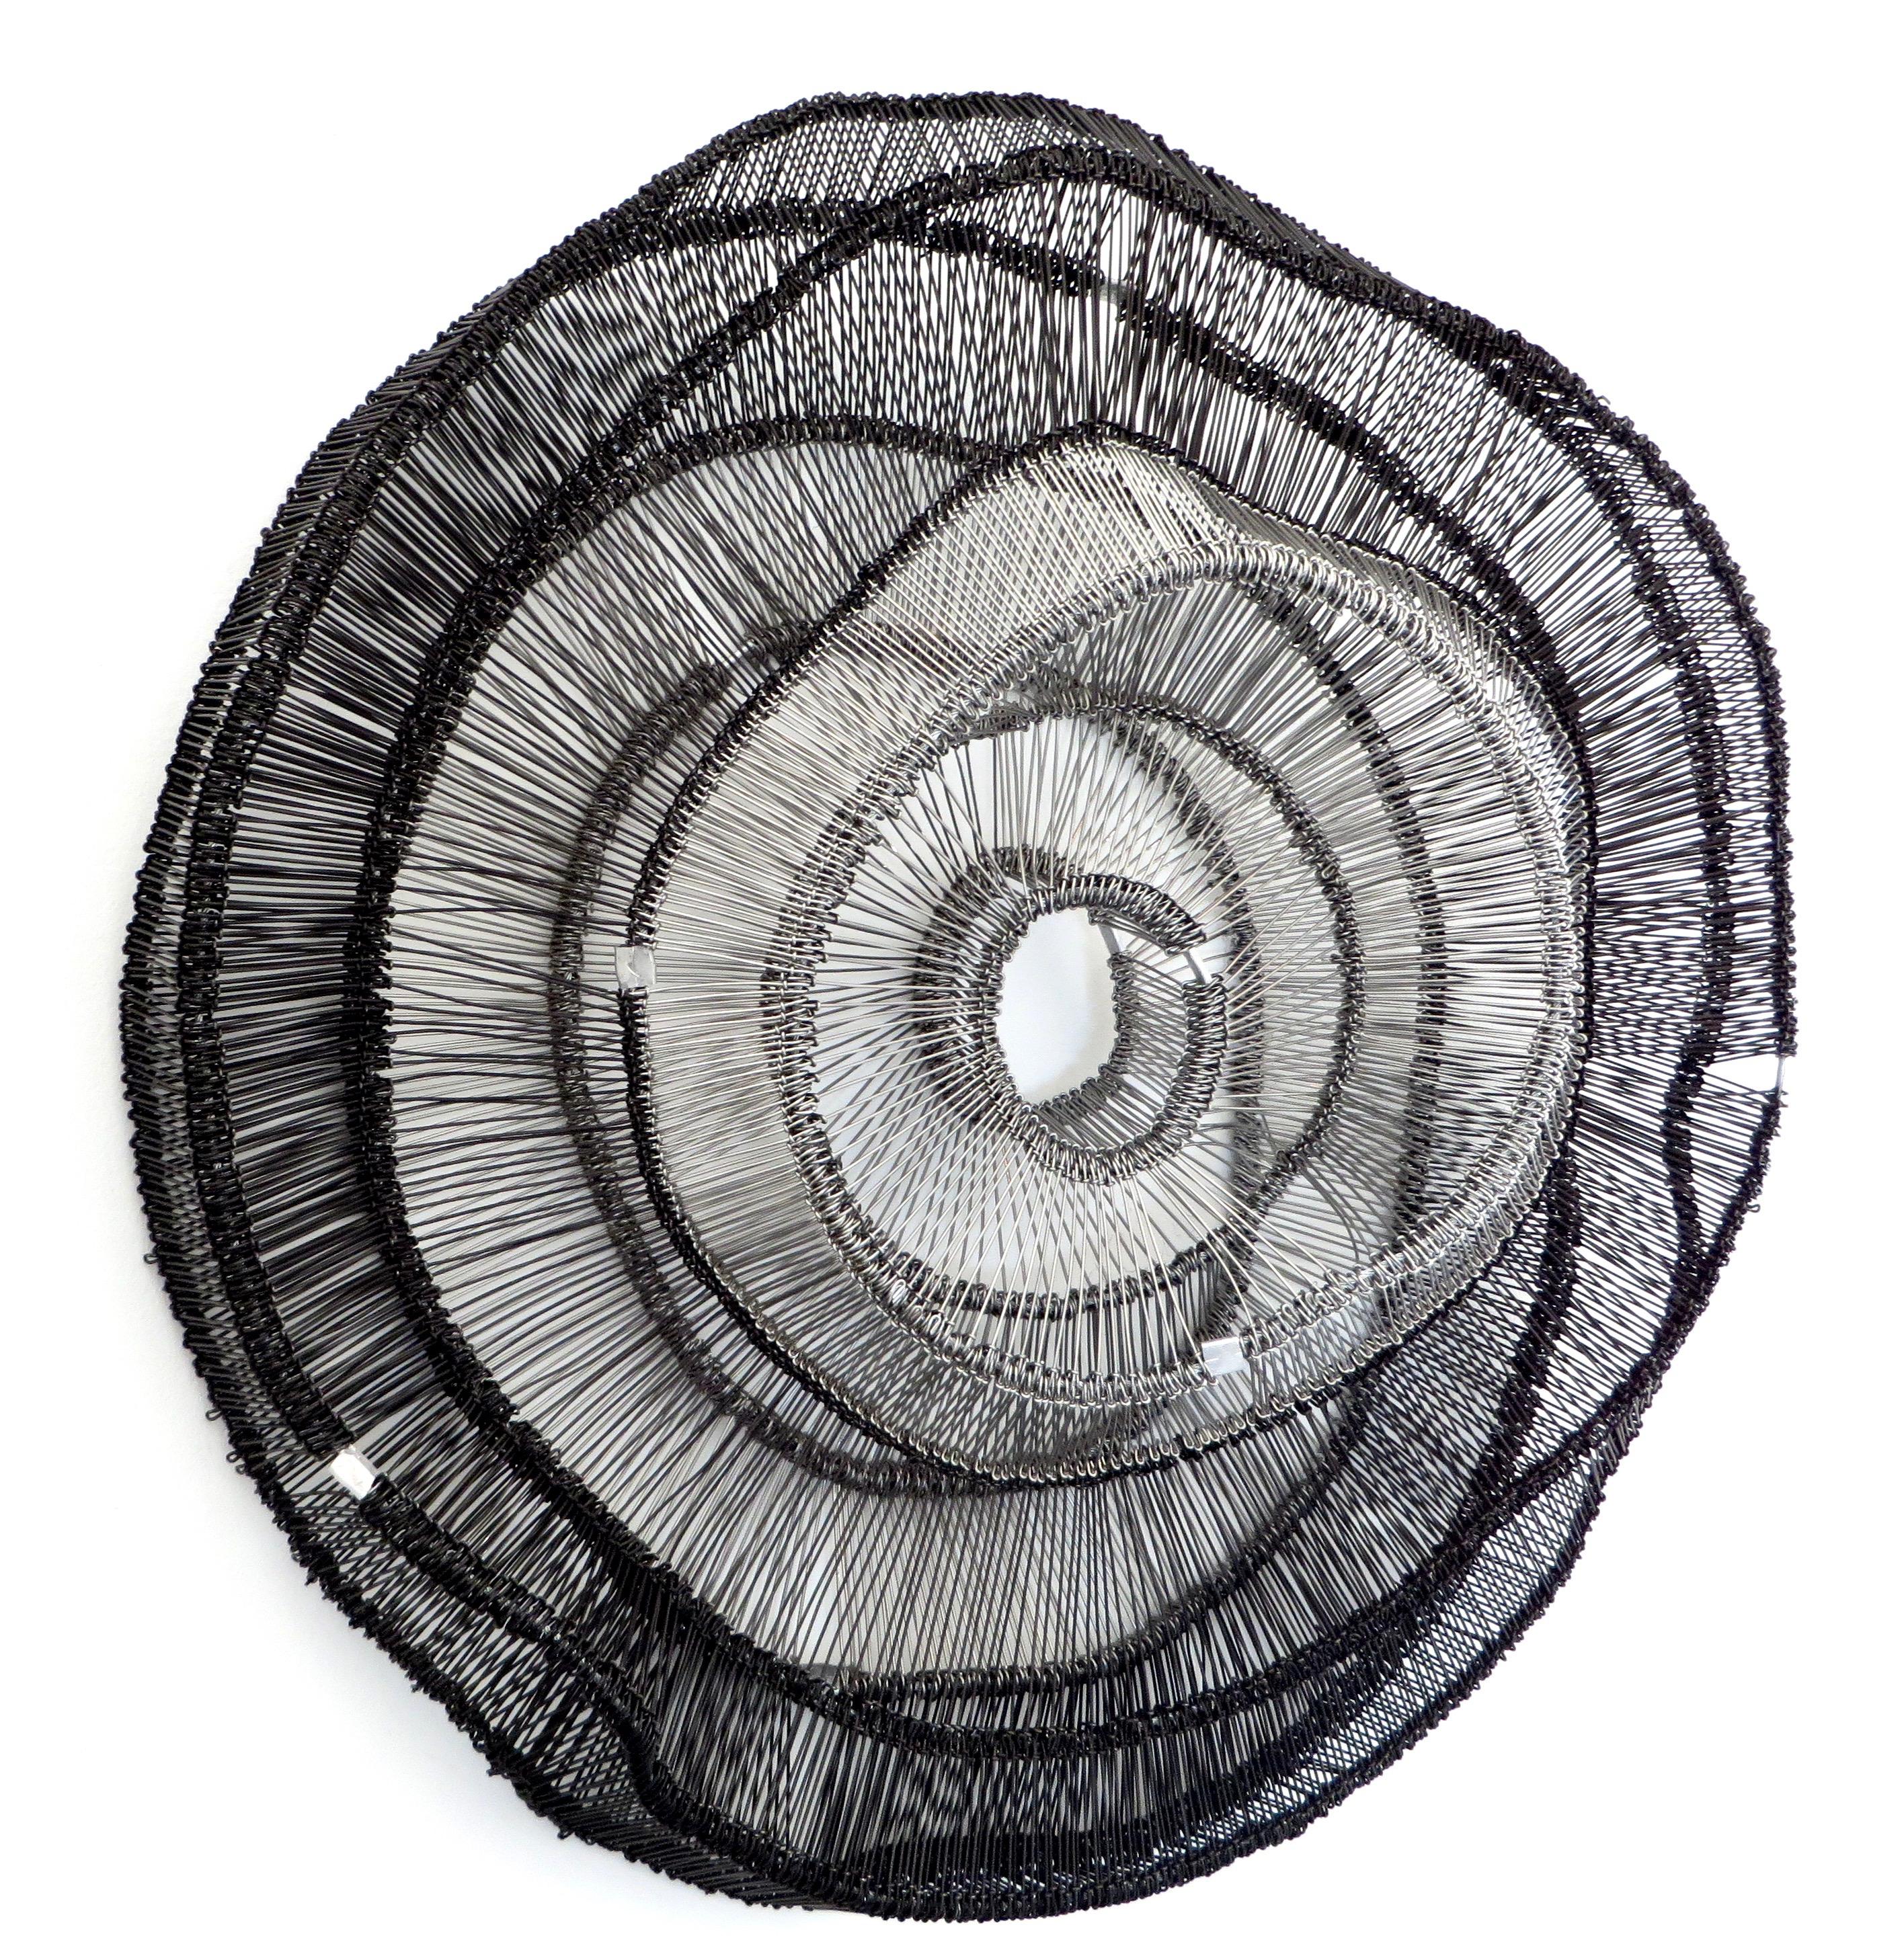 American Artist Eric Gushee Emergence Series Woven Wire Wall Sculpture